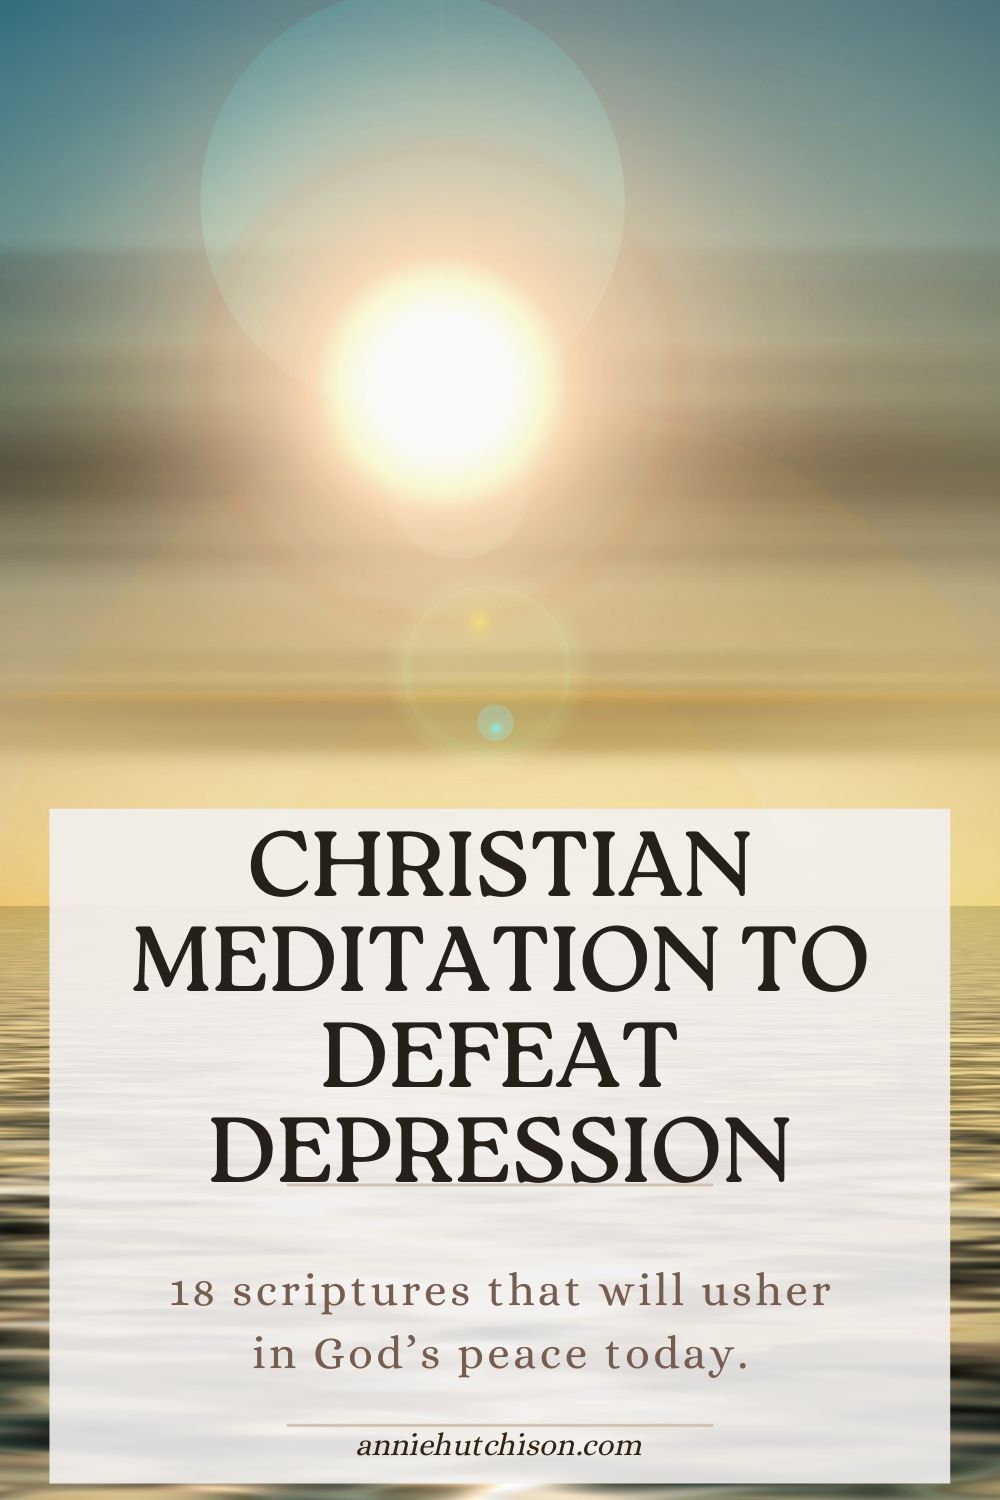 18 scriptures to fight against depression and hopelessness